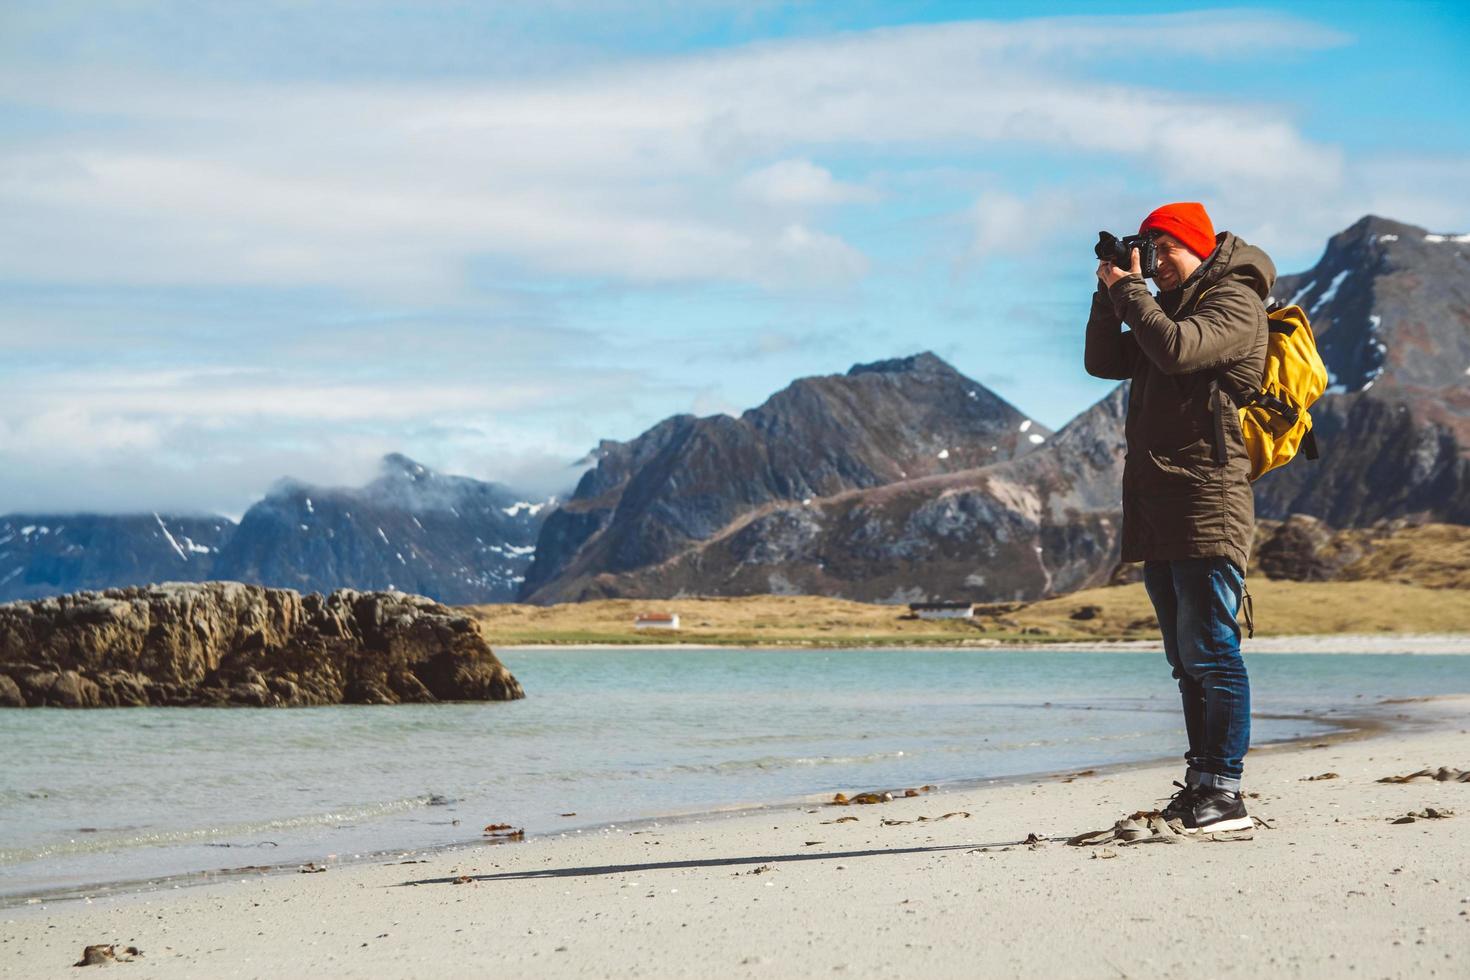 Traveler is a professional photographer taking over the landscape photo landscape. Wearing a yellow backpack in a red hat standing on a sandy beach on the background of the sea and mountains